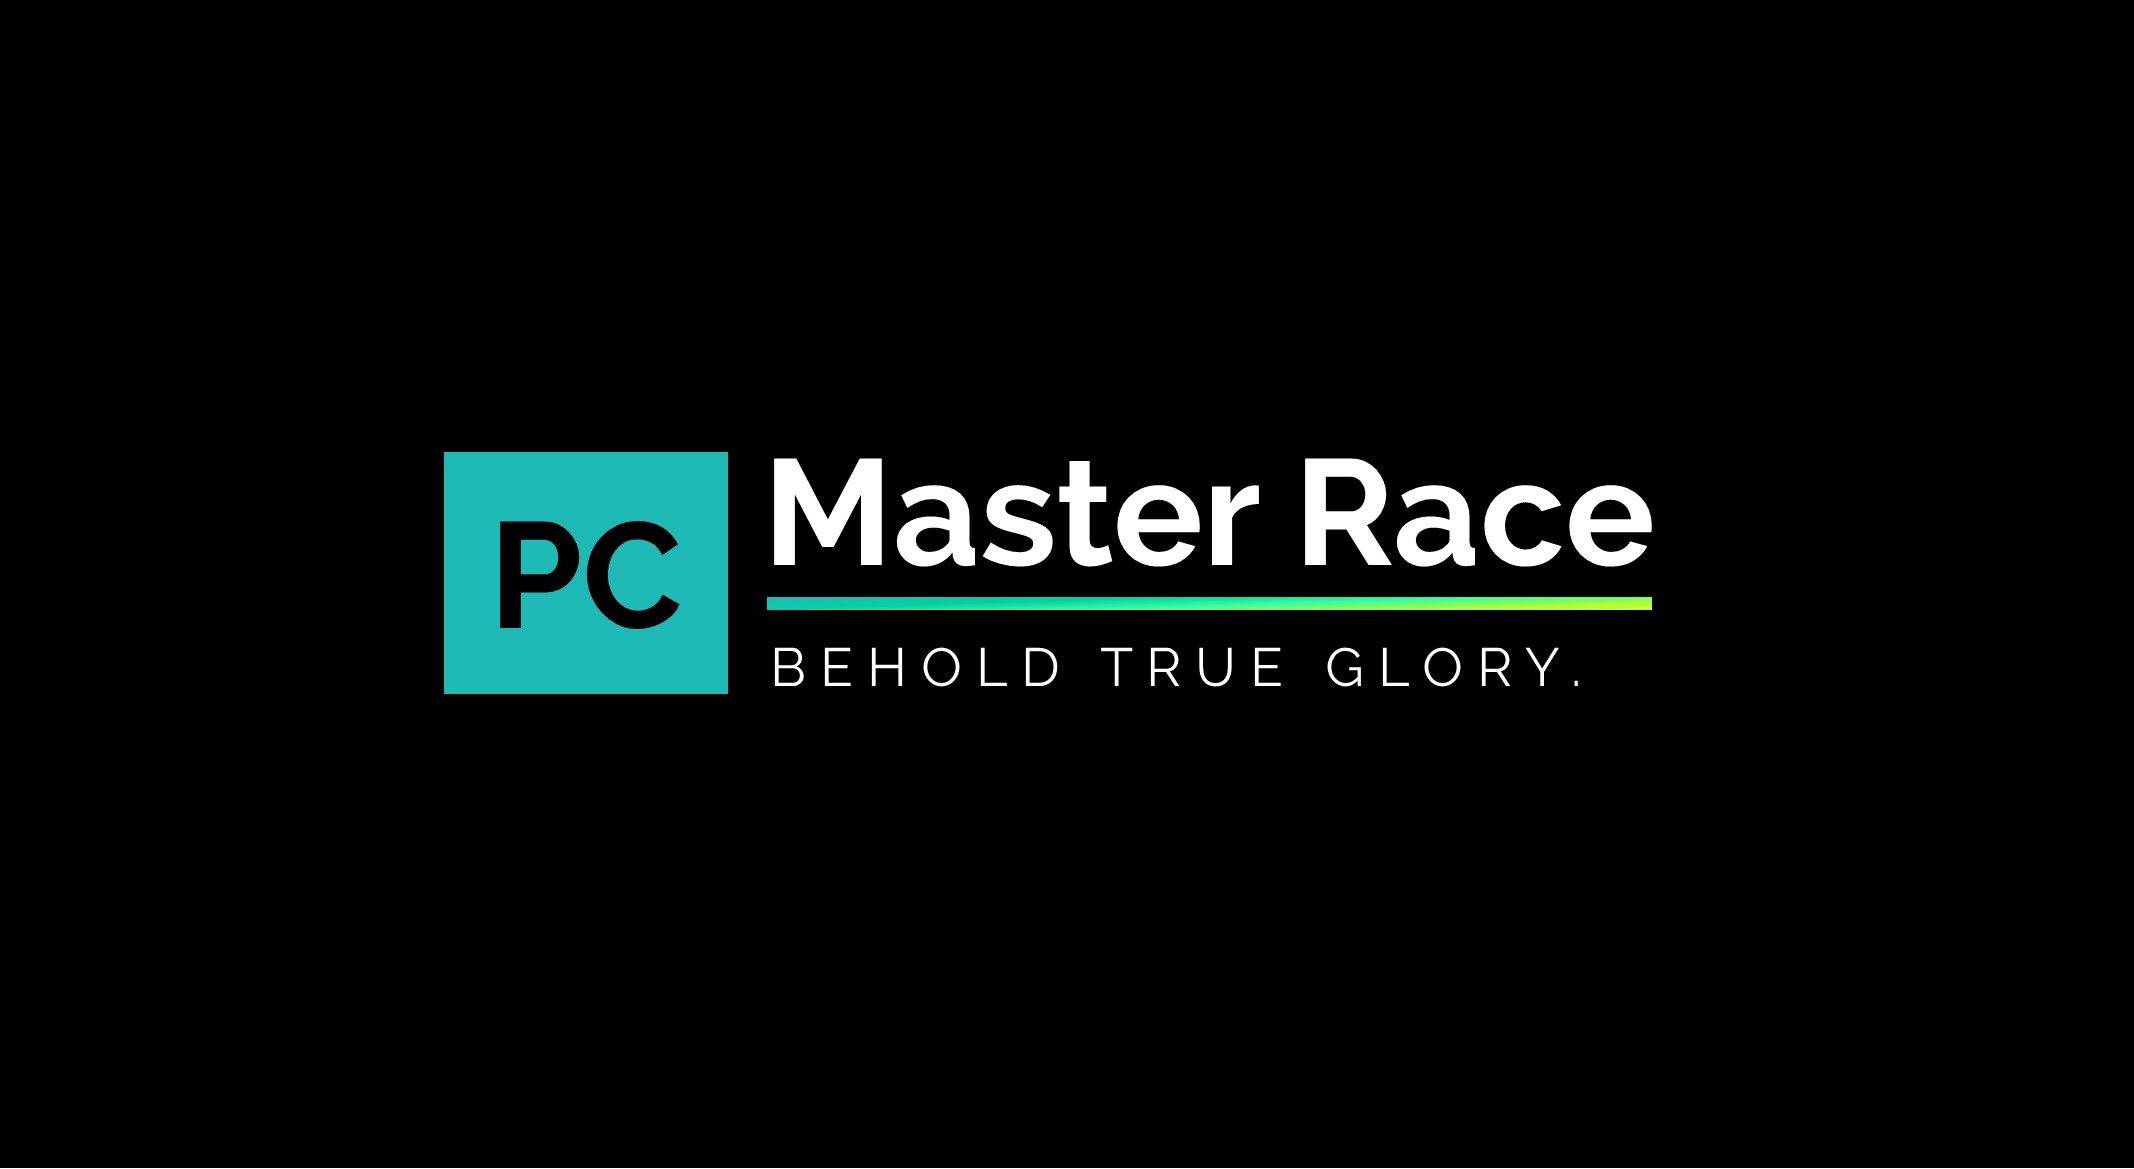 PC Master  Race, Simple, Typography, Black background Wallpaper